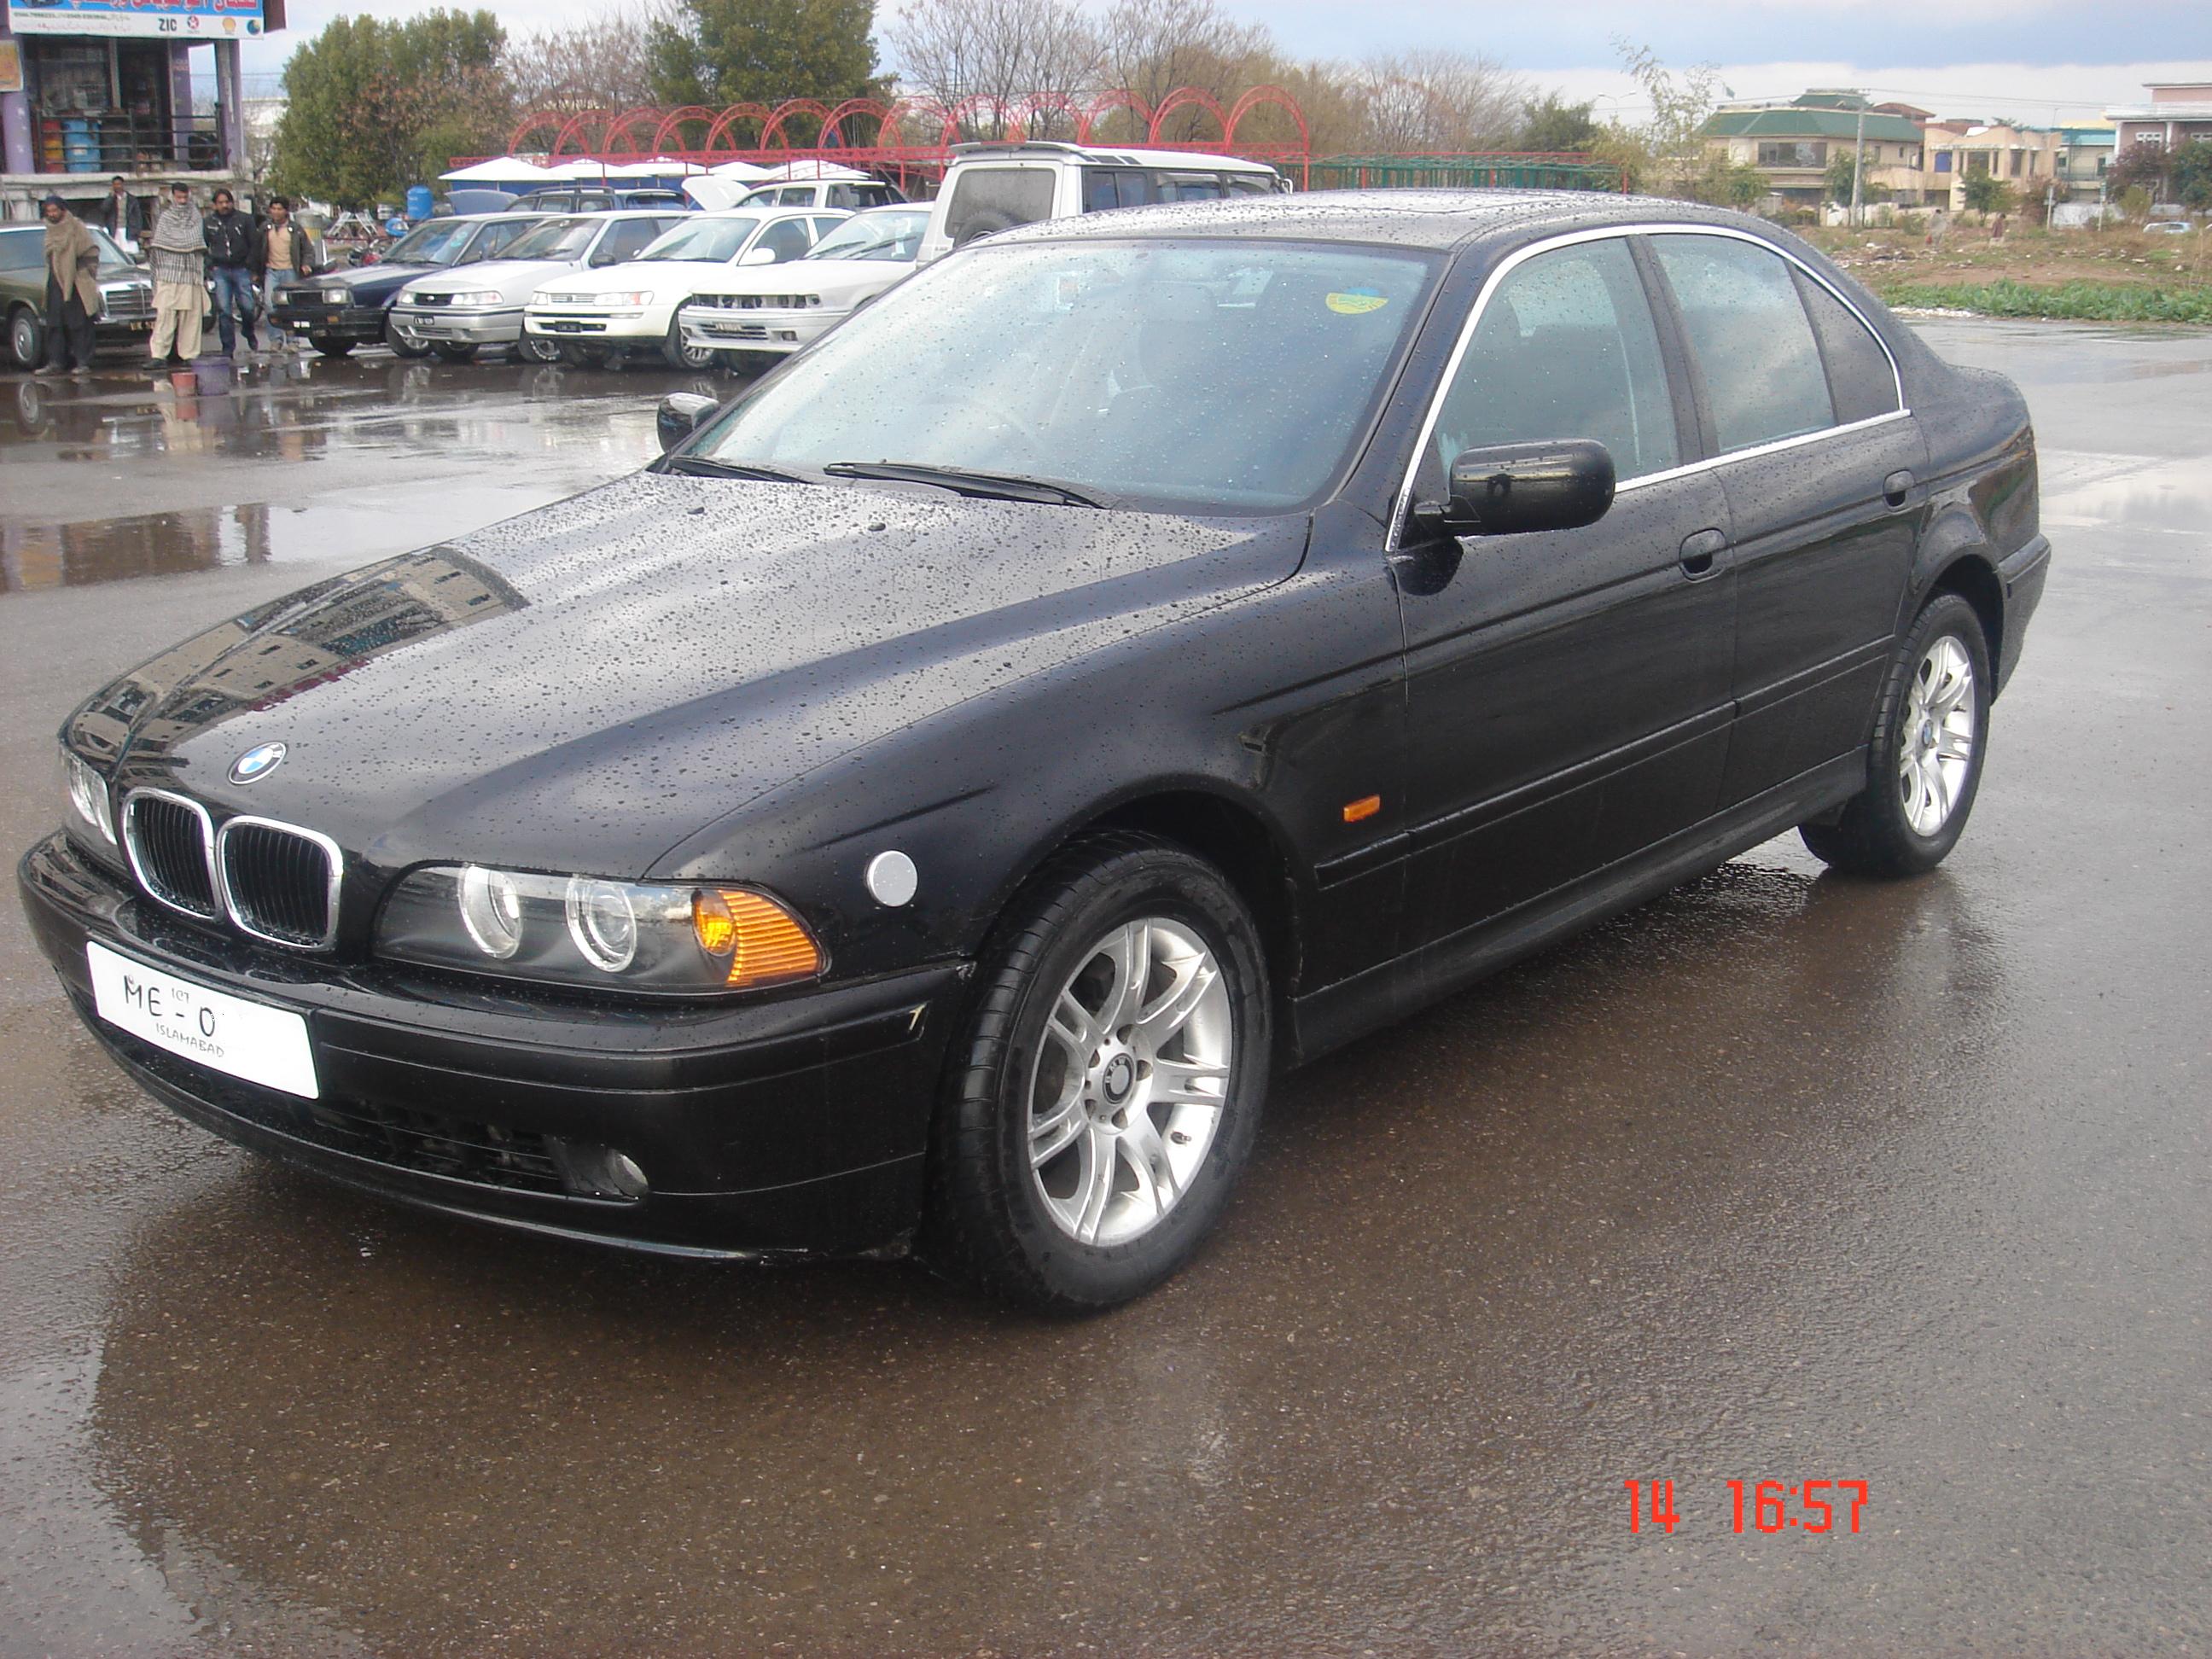 2002 Bmw 5 series reports #6